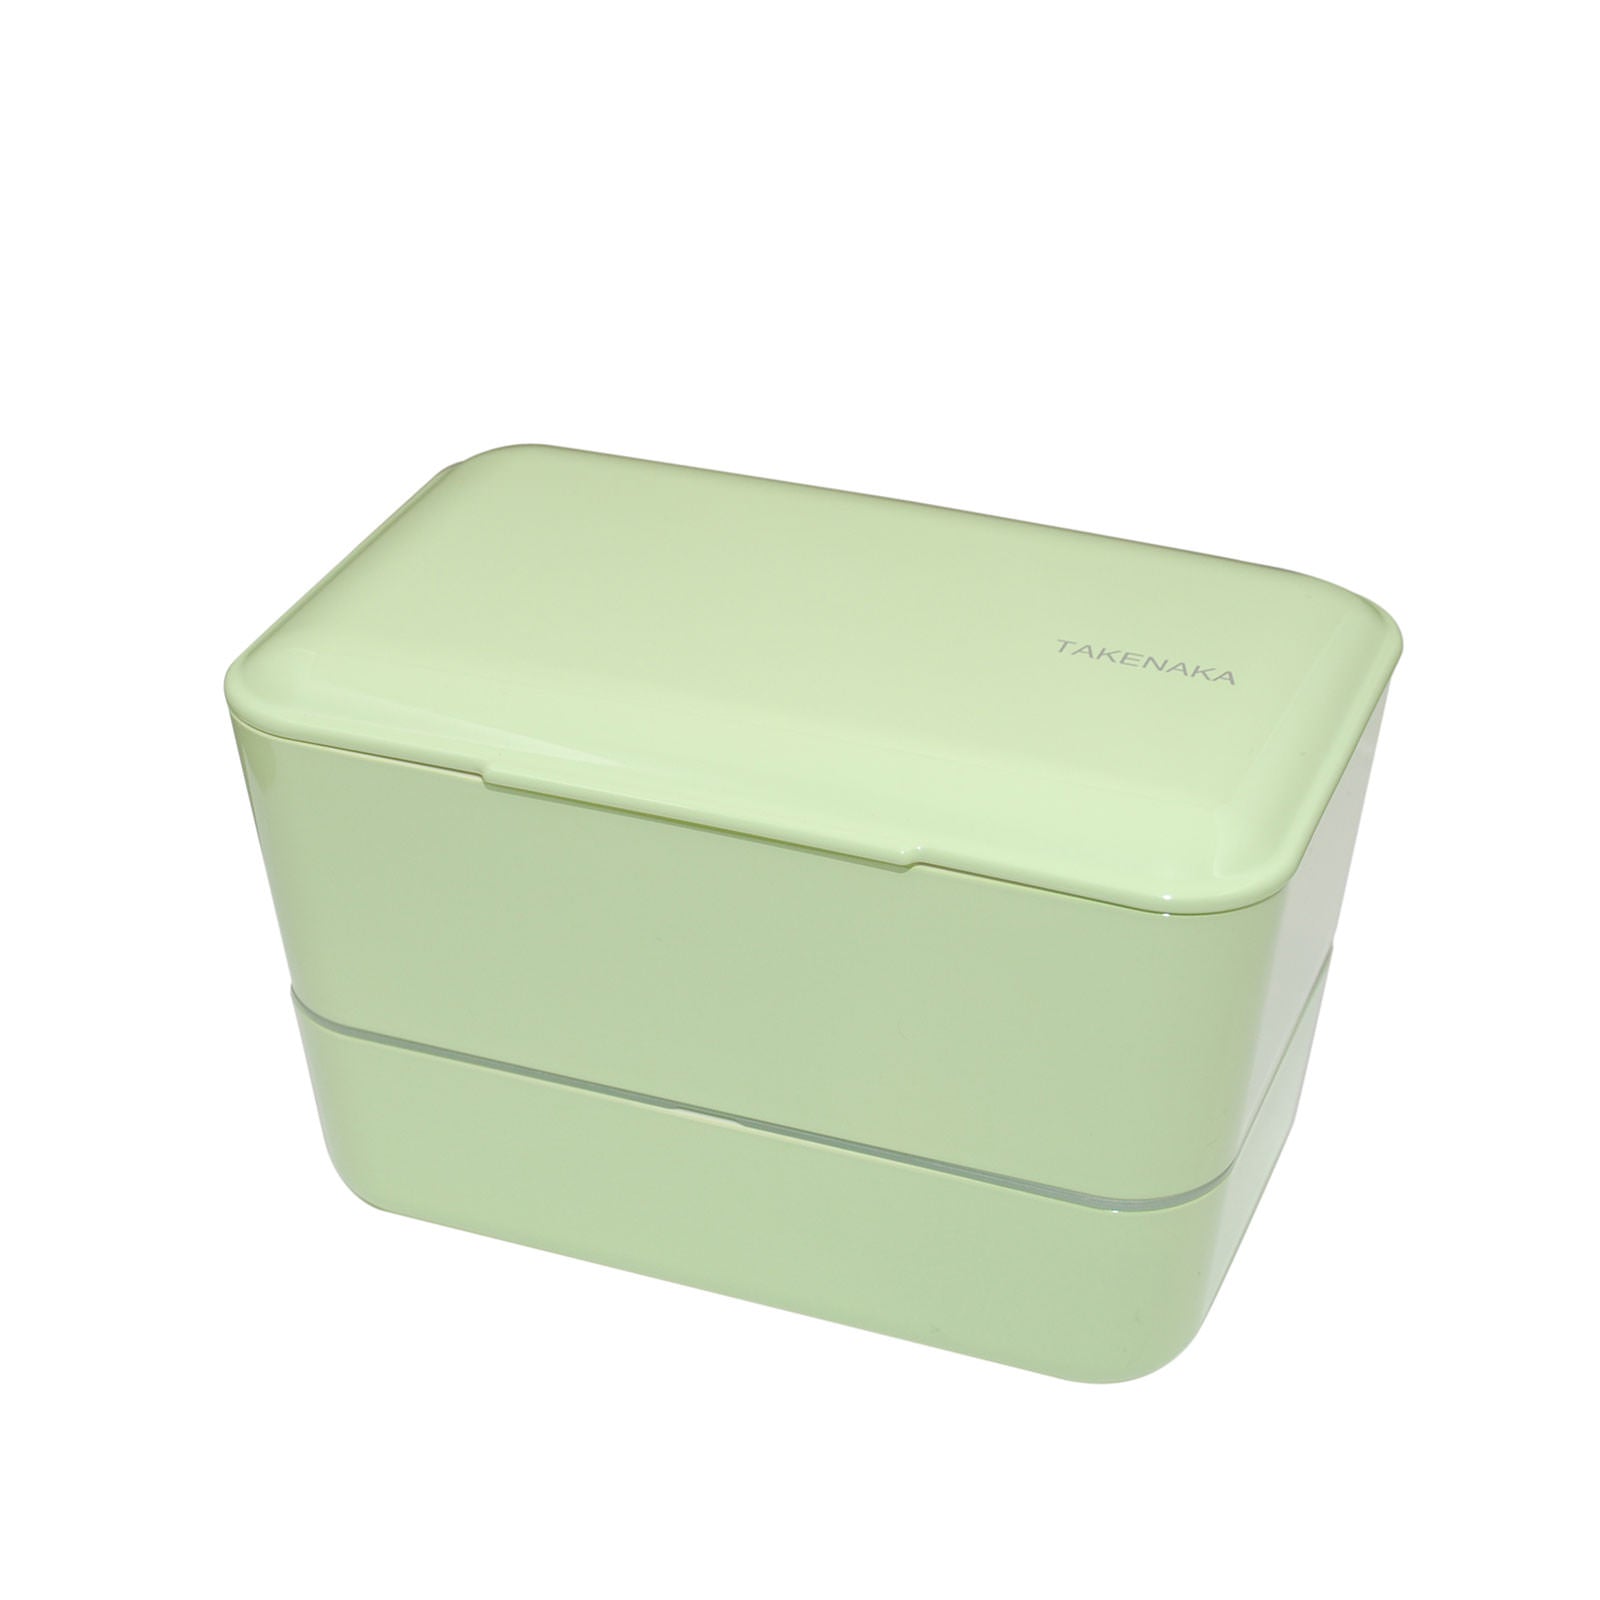 TAKENAKA Bento Box Flat from Japan, Made of Recycled Plastic Bottle,  Eco-Friendly and Sustainable Lunch Box (Pale Olive)